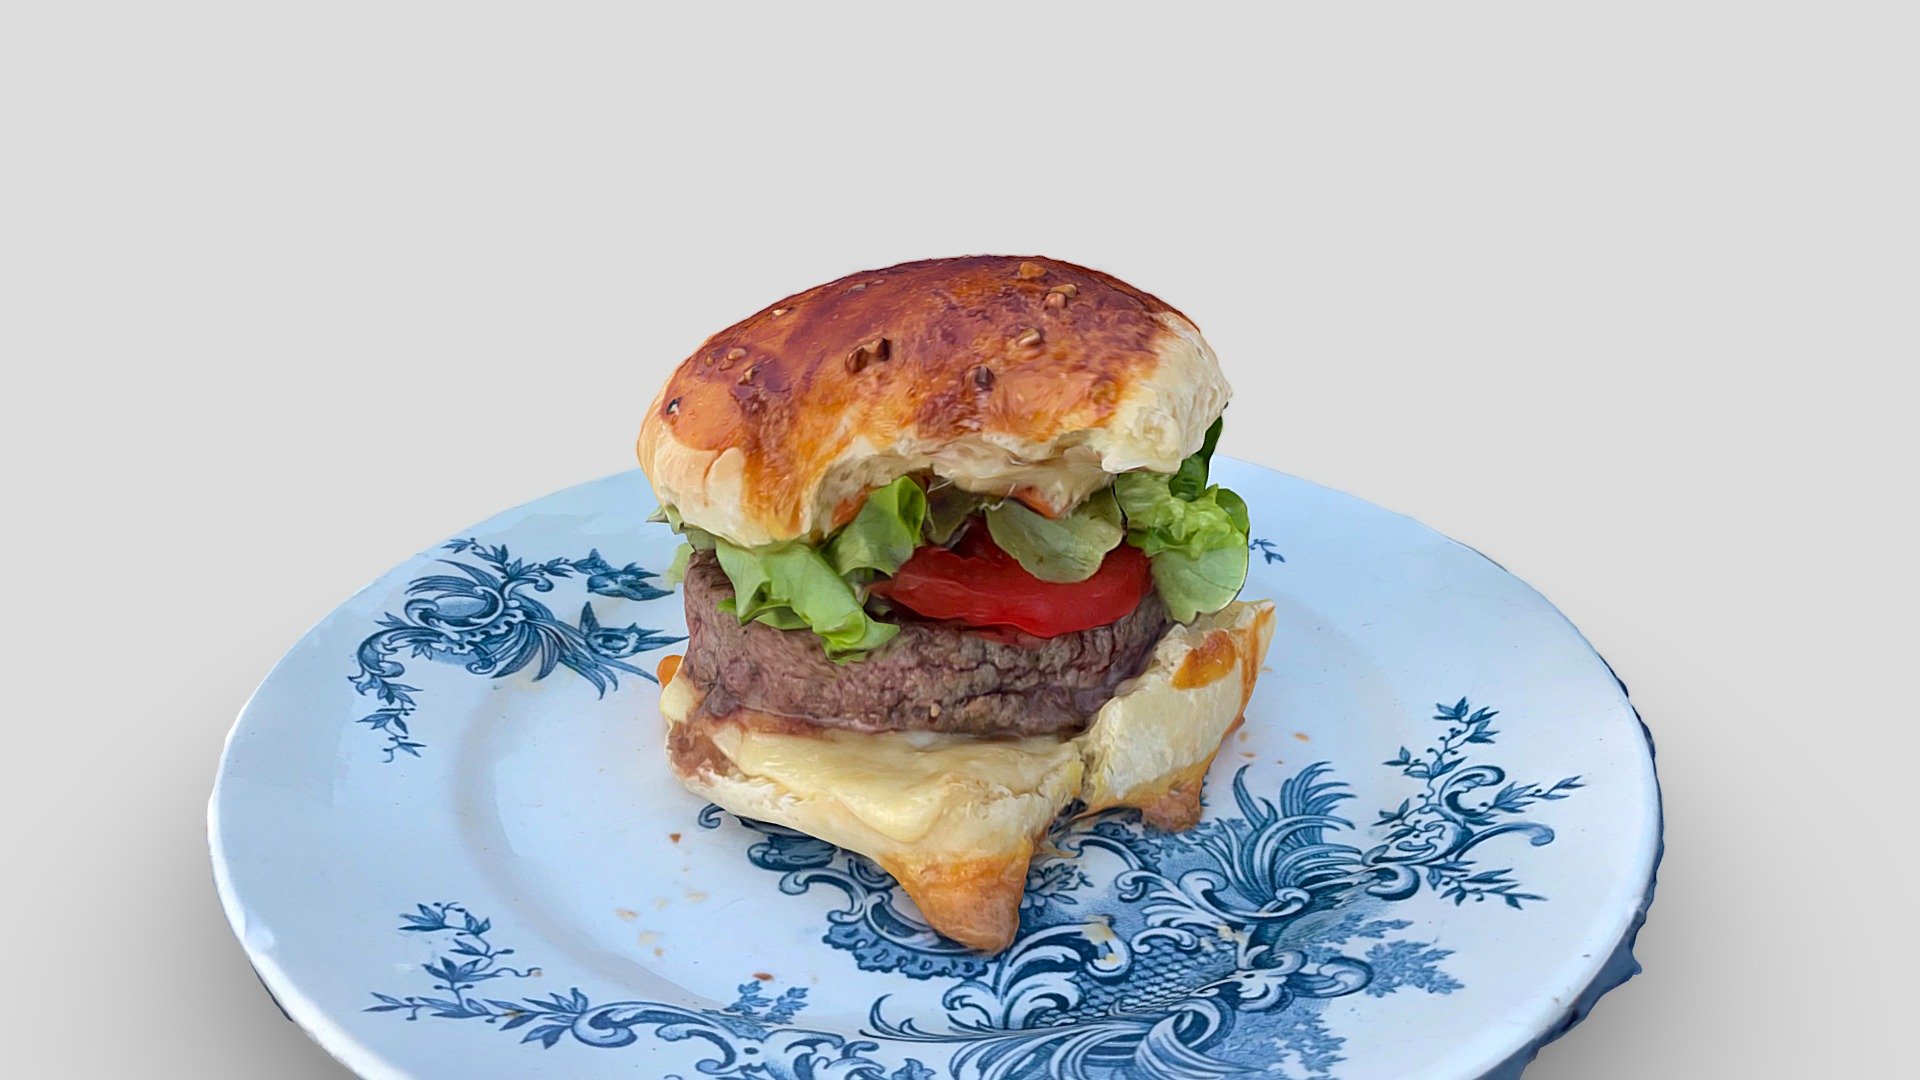 Spent a week with my brothers-in-law. We made team to prepare nice meals, and they did a fabulous burger, with home made buns.

Captured with Polycam - Home made burger by T & Q - Download Free 3D model by alban 3d model